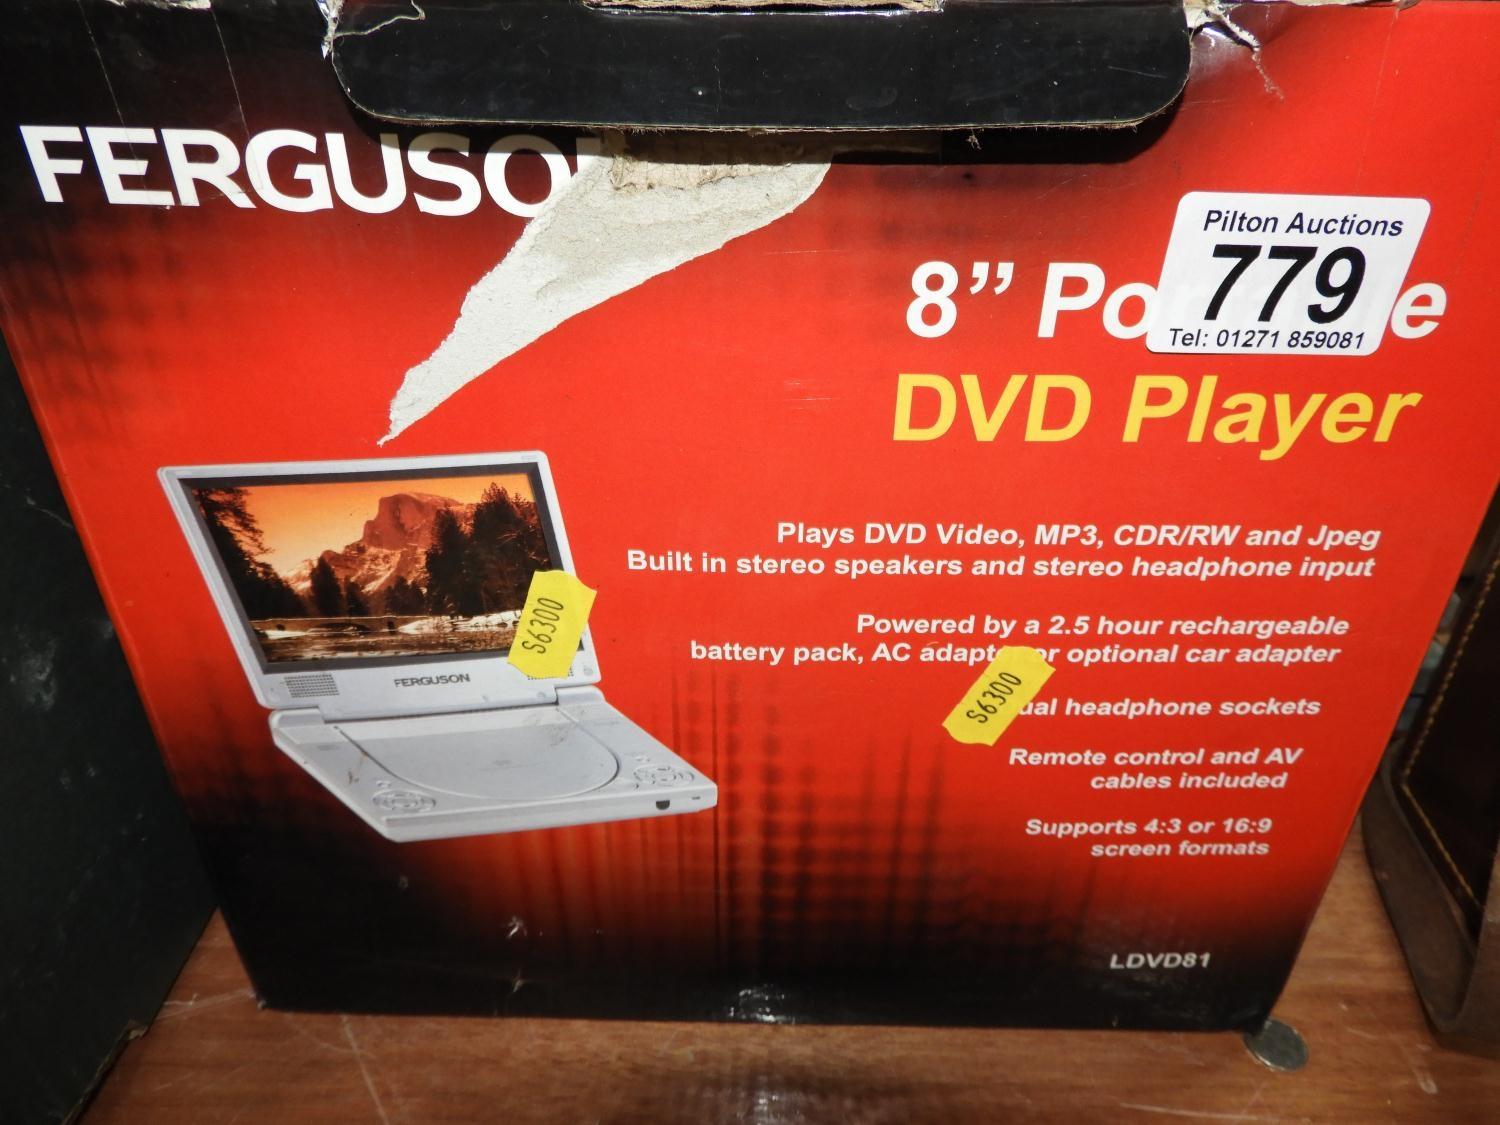 Boxed DVD Player